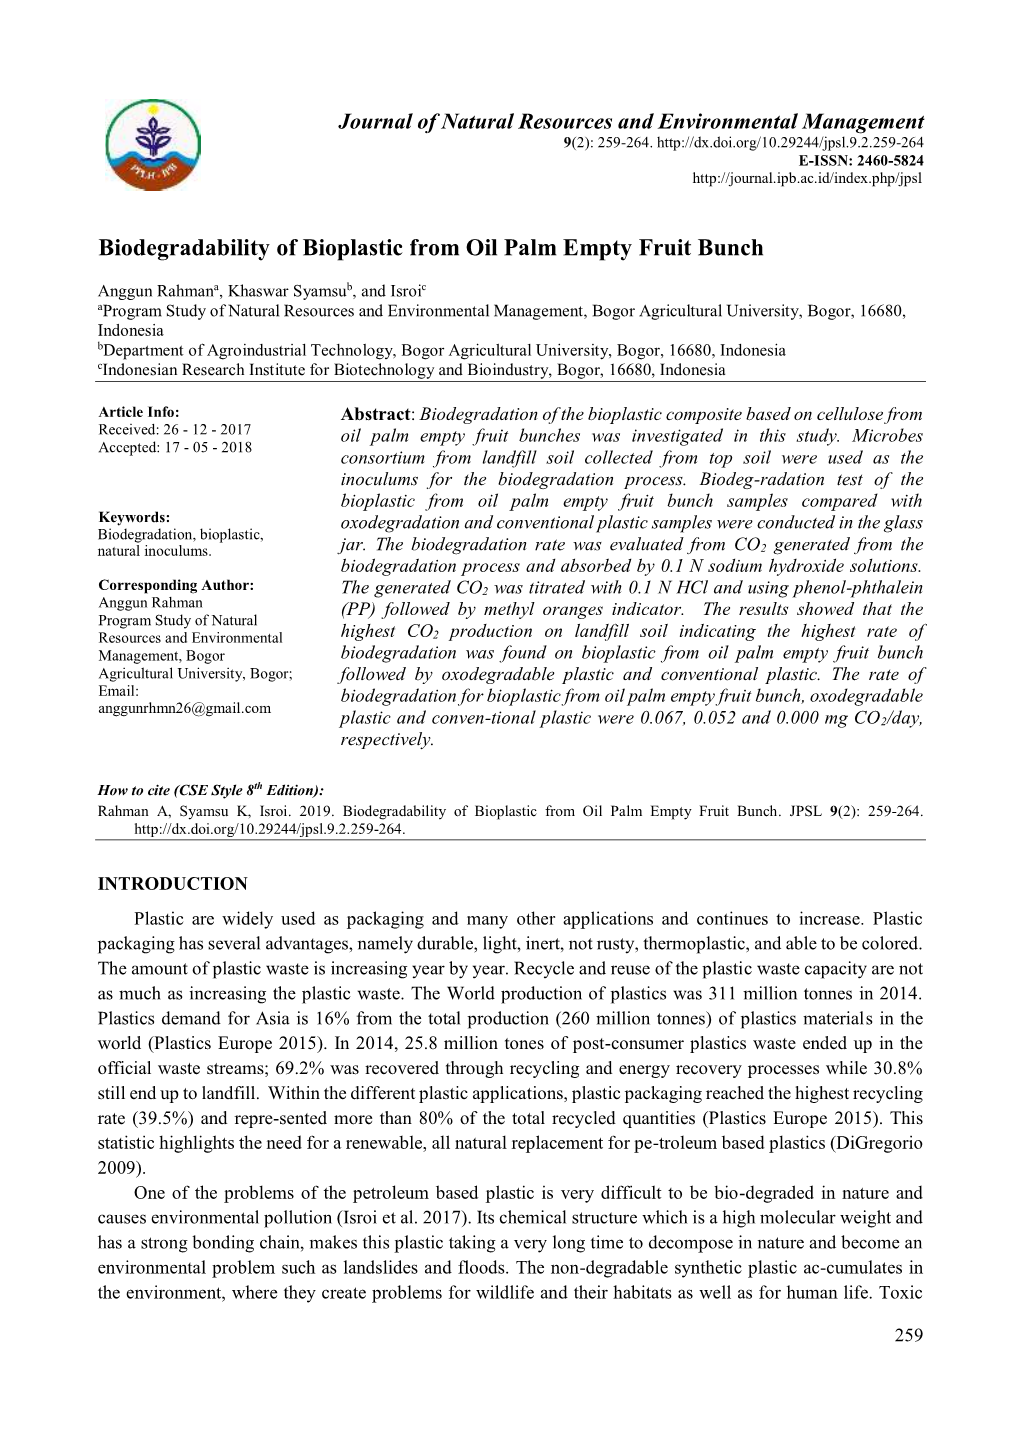 Biodegradability of Bioplastic from Oil Palm Empty Fruit Bunch